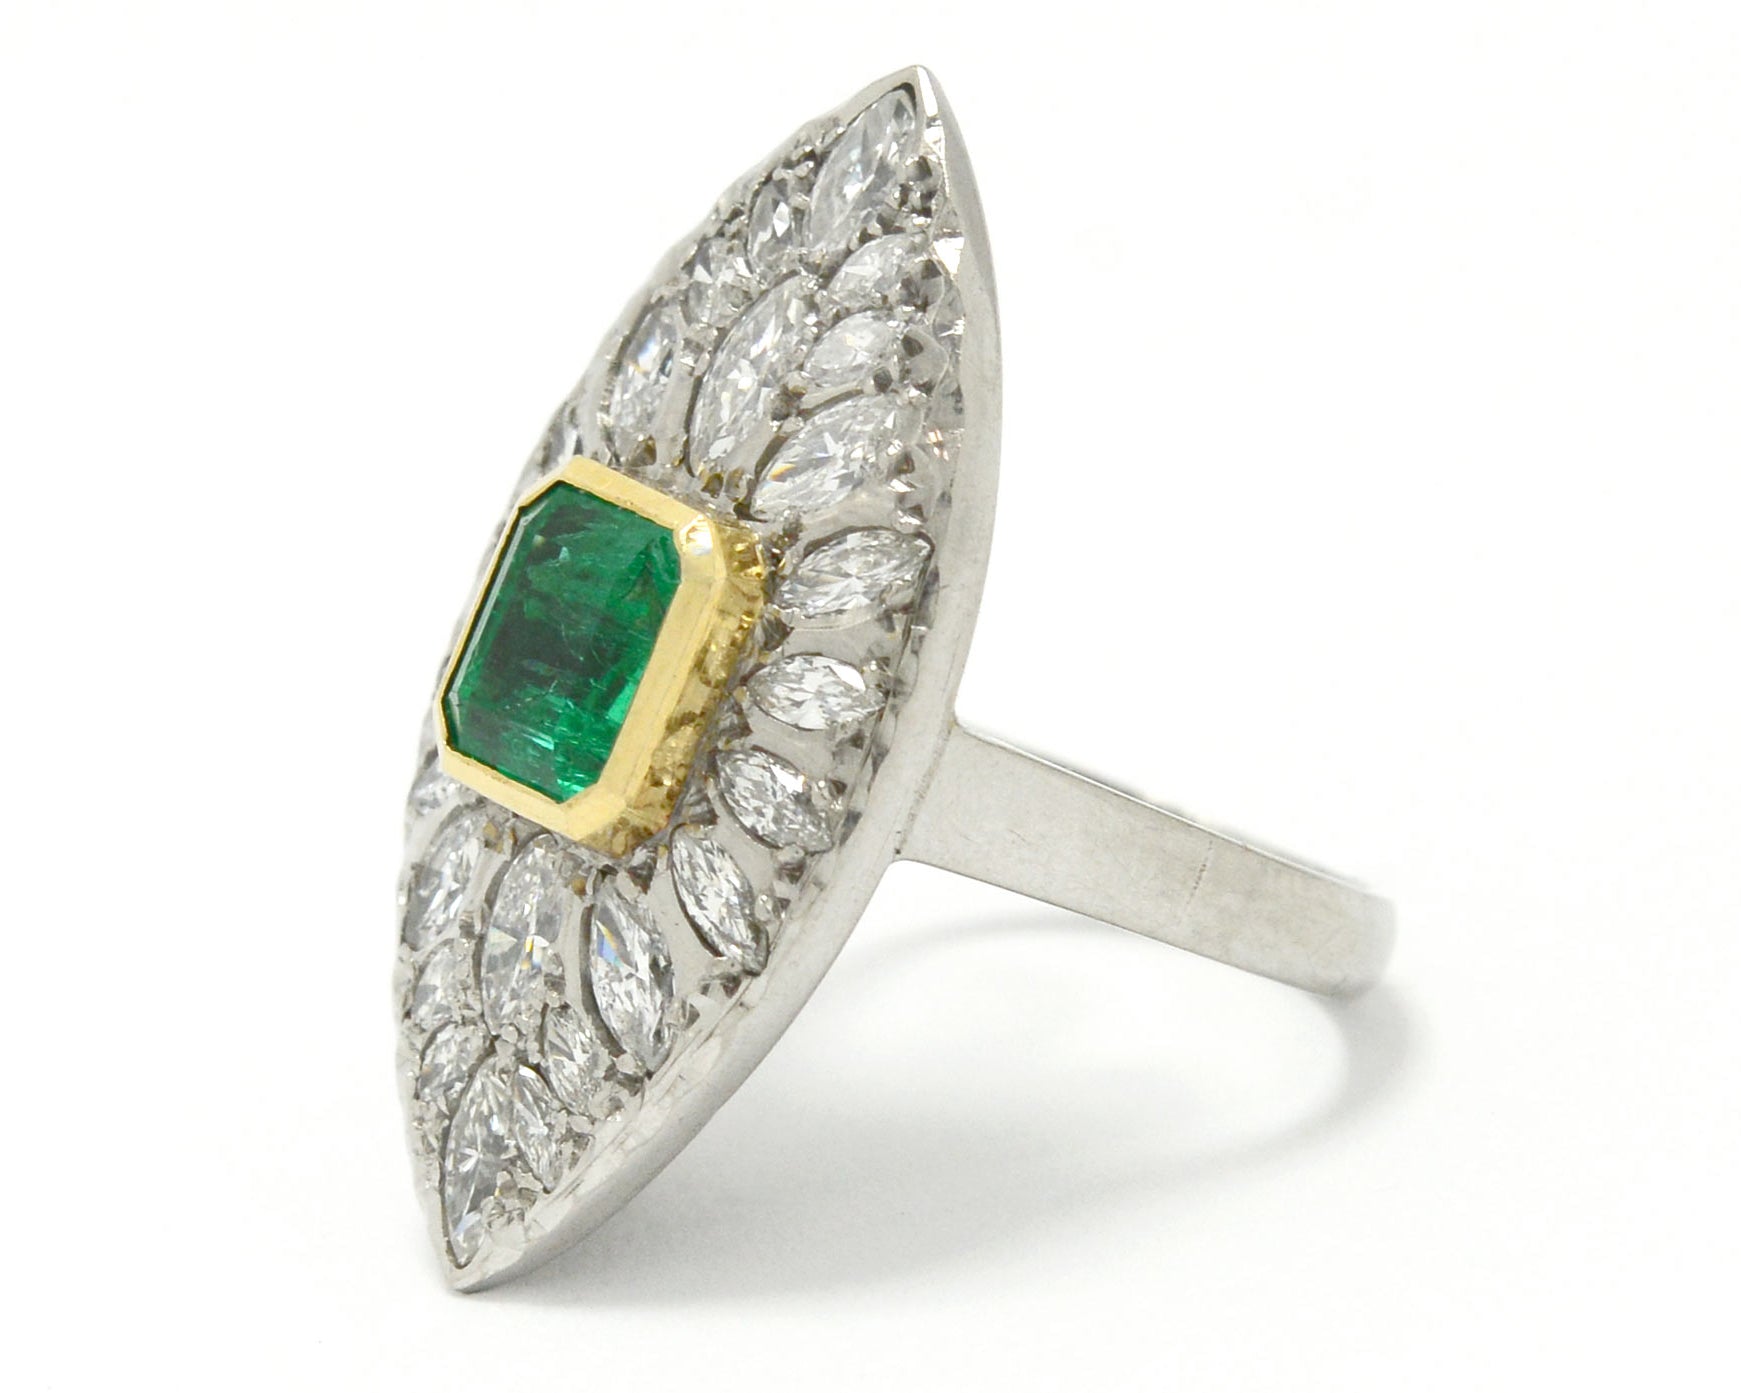 An 18k yellow gold bezel supports the two carat emerald in this stunning cluster statement ring.